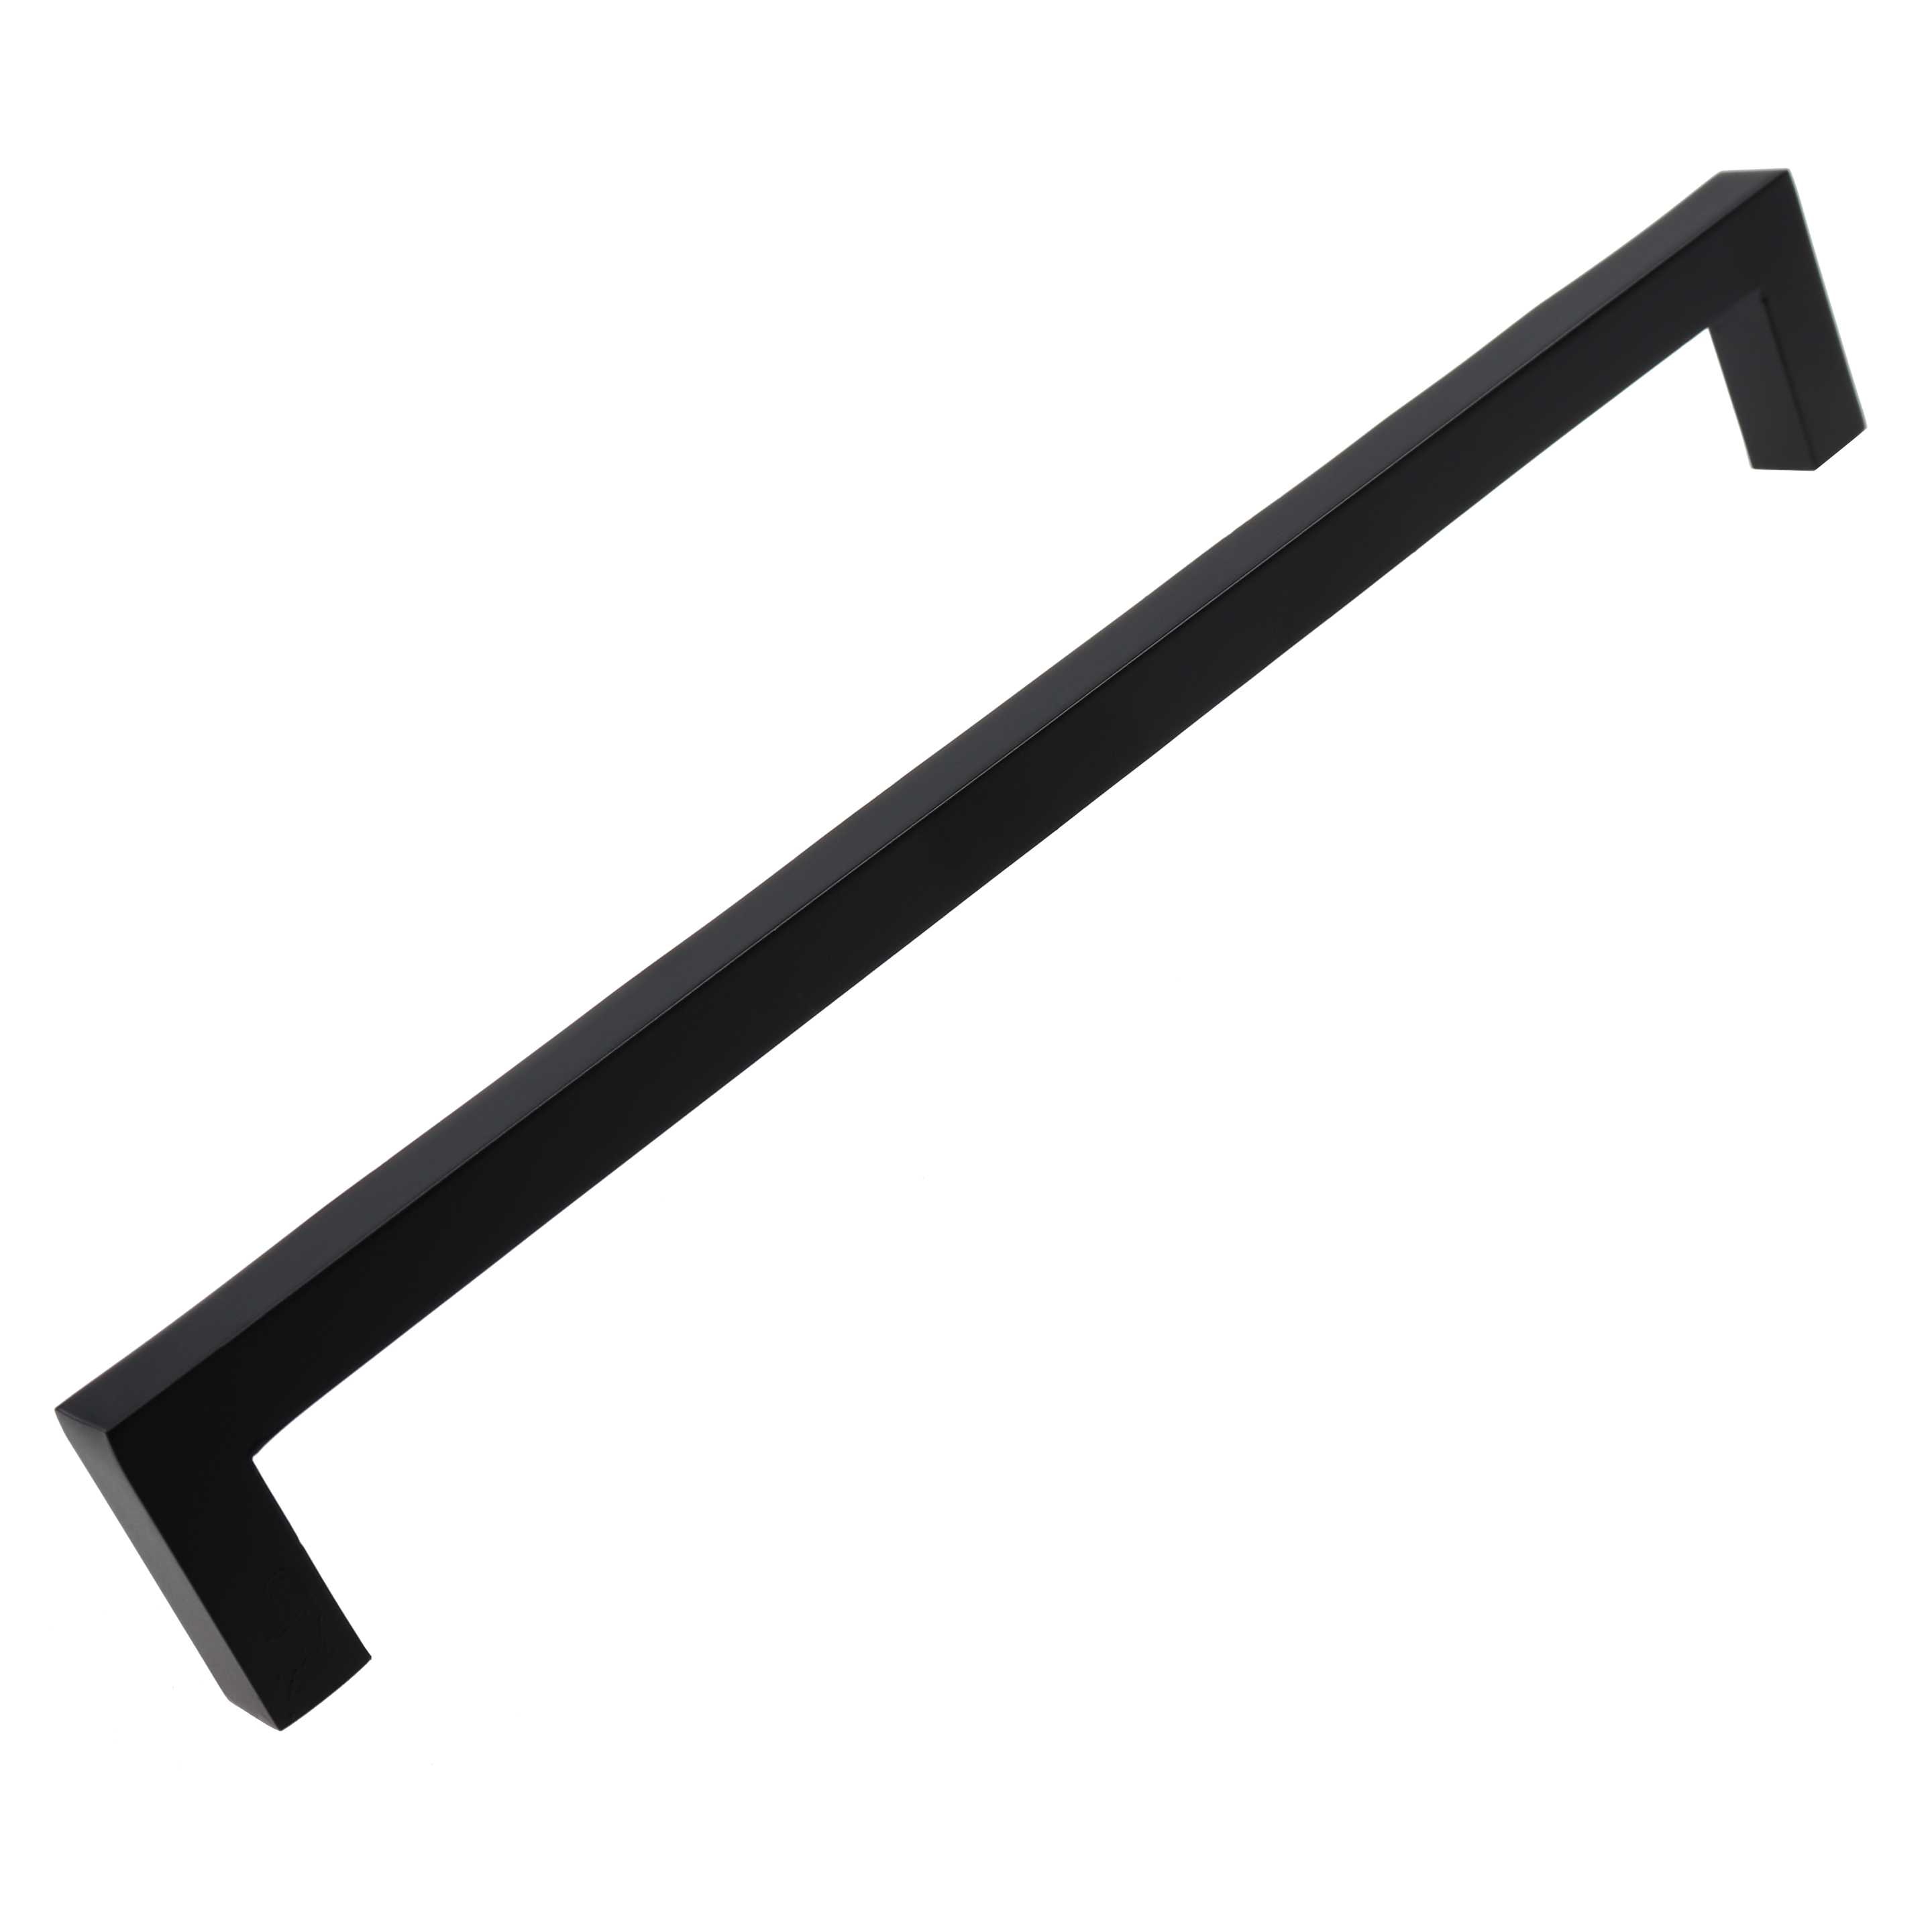 GlideRite 8.75 in. Center Solid Square Bar Cabinet Pulls, Matte Black, Pack of 10 - image 1 of 4